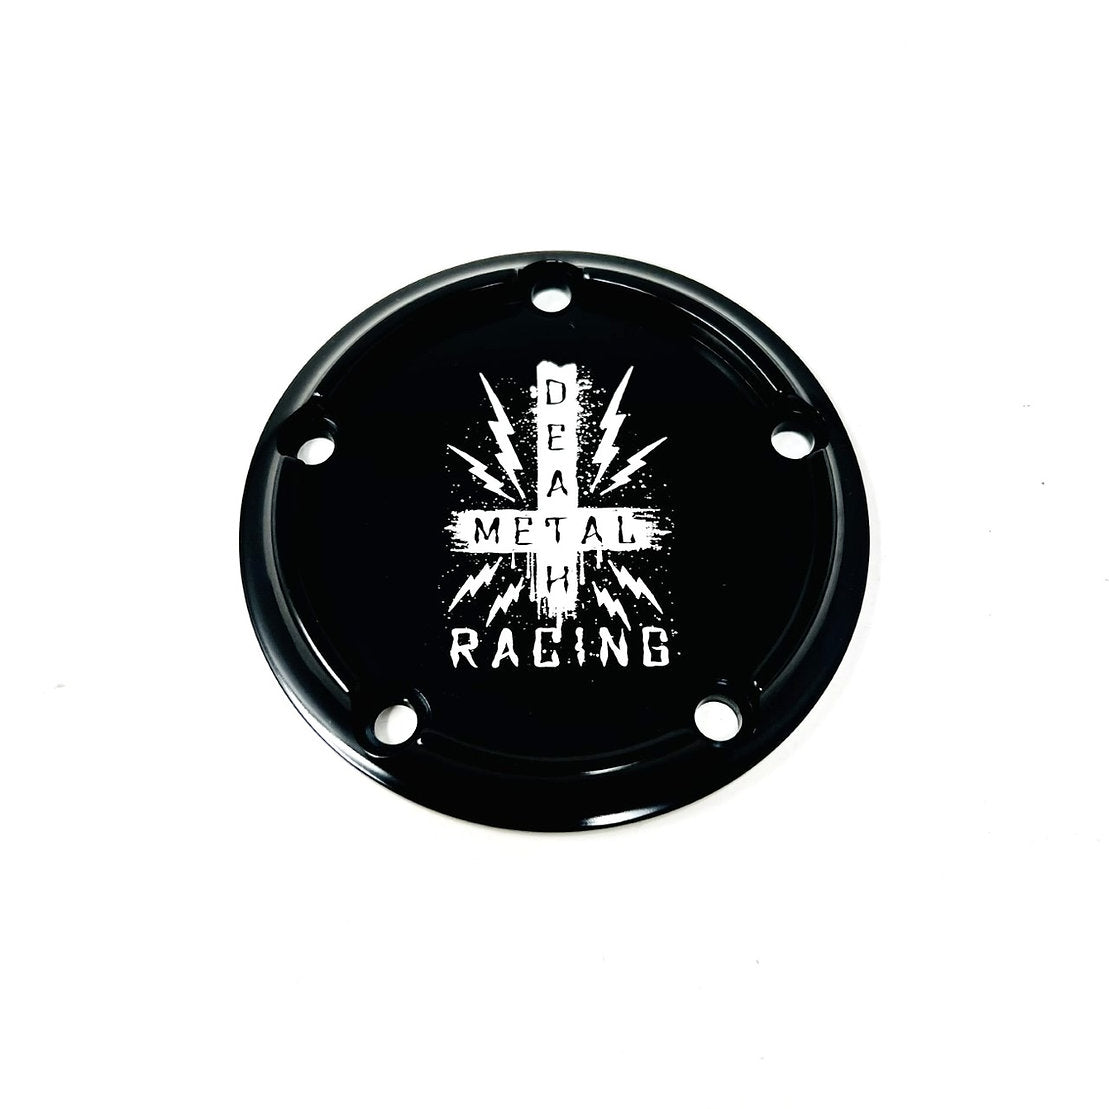 5 Holes Ignition Cover - Twin Cam